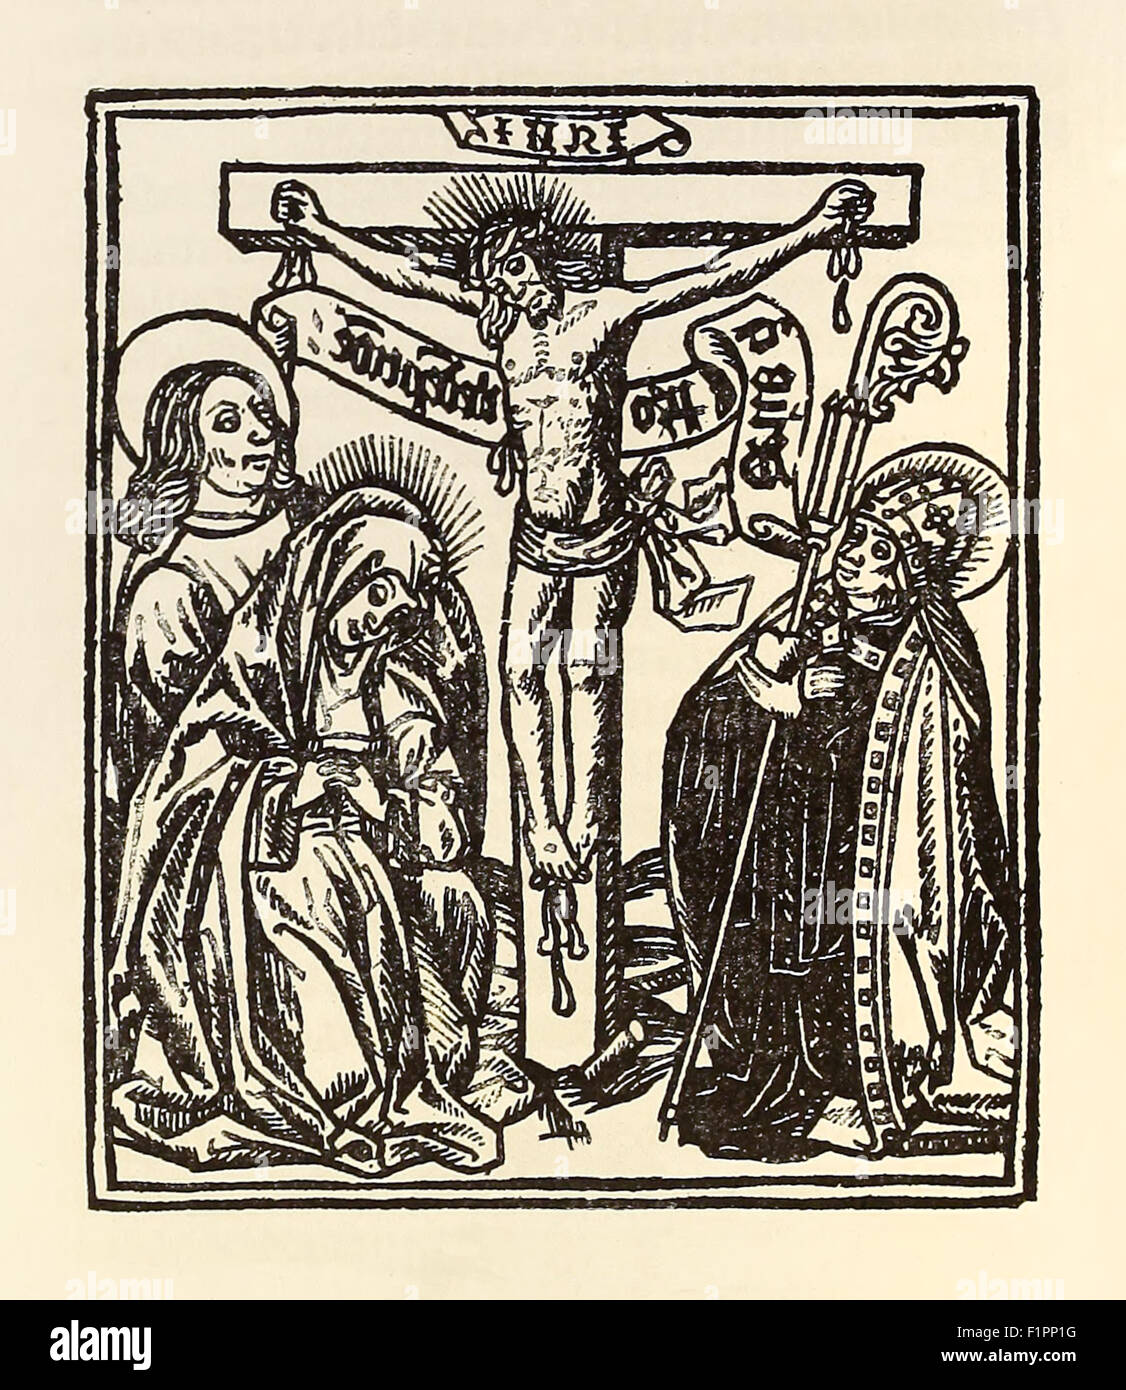 Crucifixion of Christ, woodcut from 1504, last page from  'Calcoen' published in Antwerp, Belgium in 1504; an account of  Vasco da Gama's second voyage to India printed in Flemish. See description for more information. Stock Photo